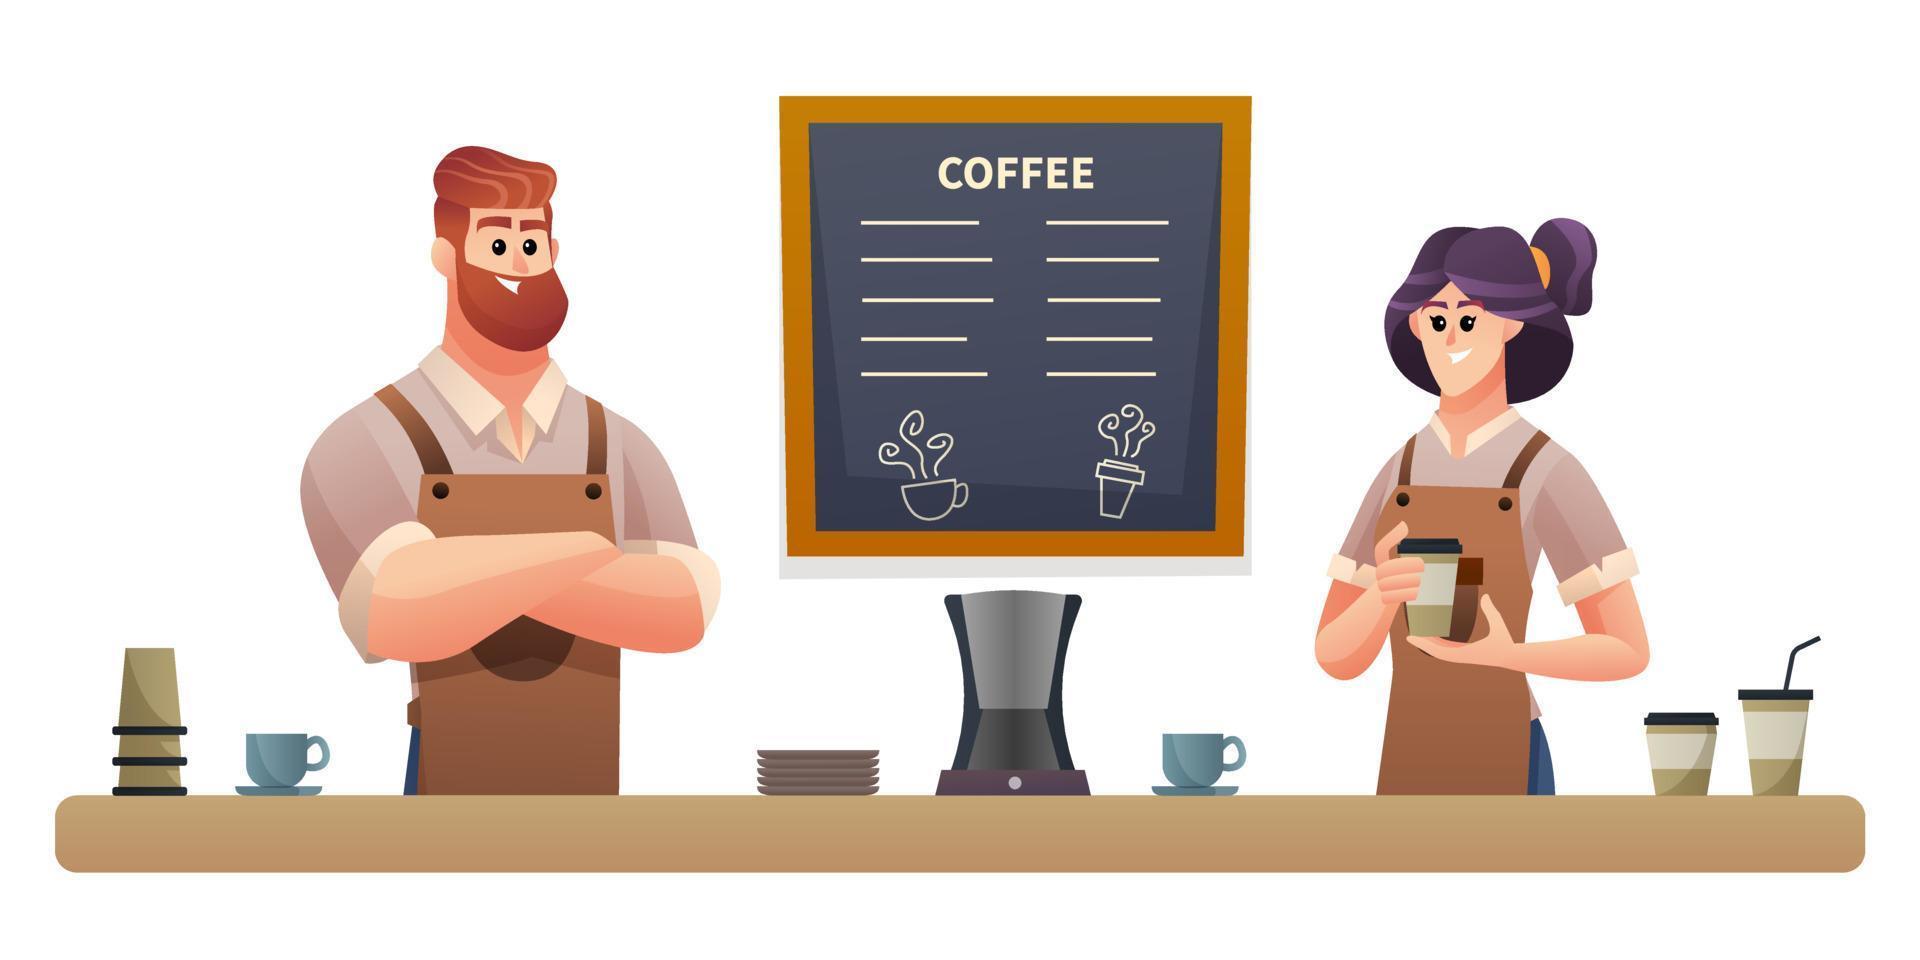 Man and woman baristas working at coffee shop illustration vector